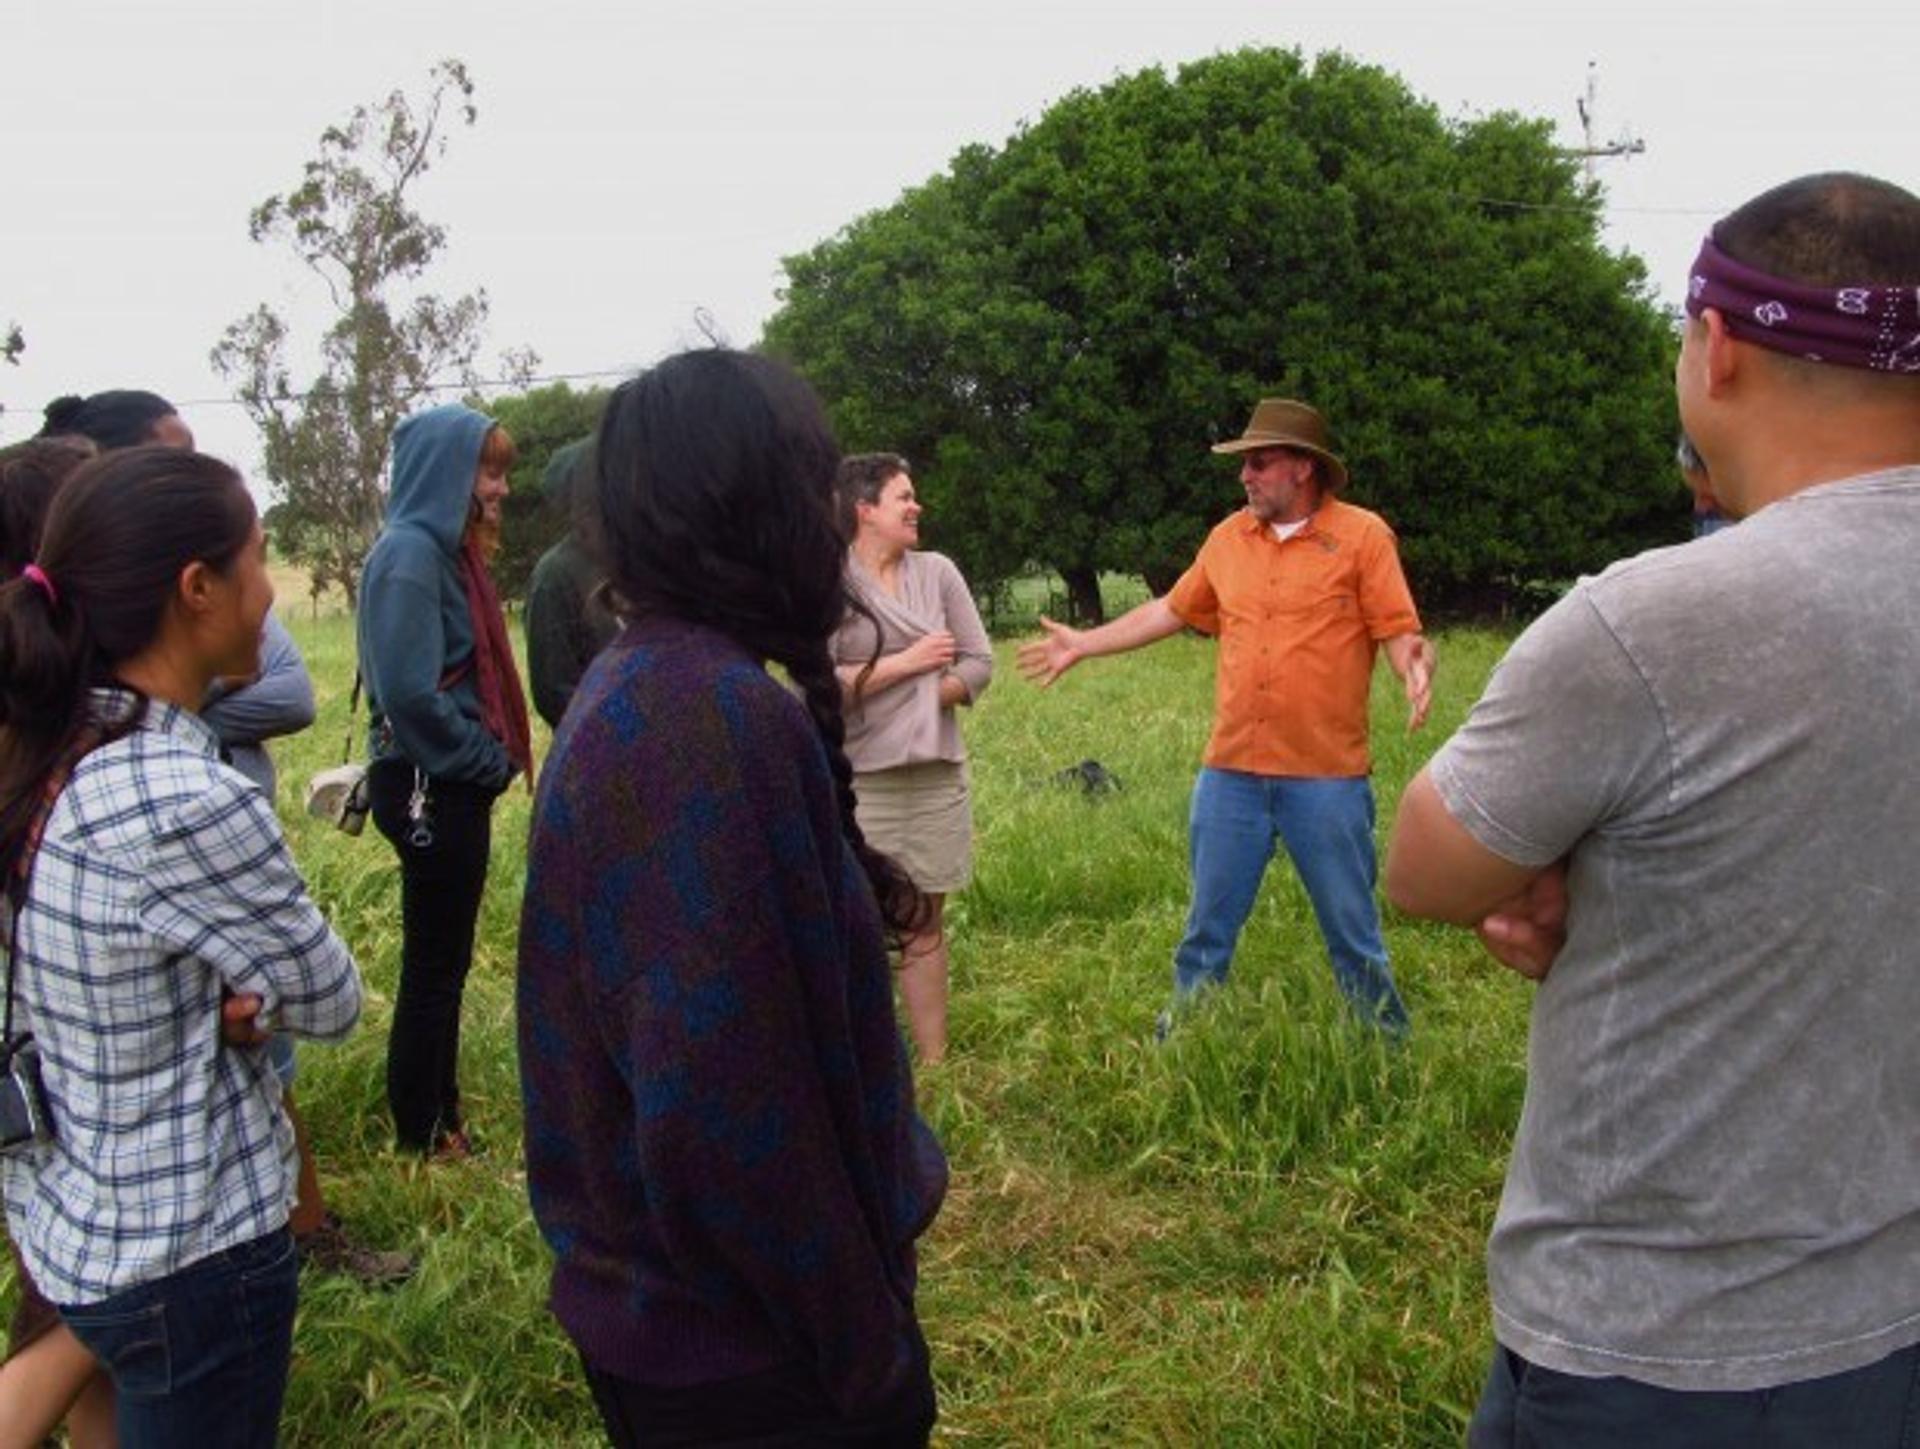 Dr. Guy speaks to a tour group about why high quality pasture is vital to animal health during a pasture walk.